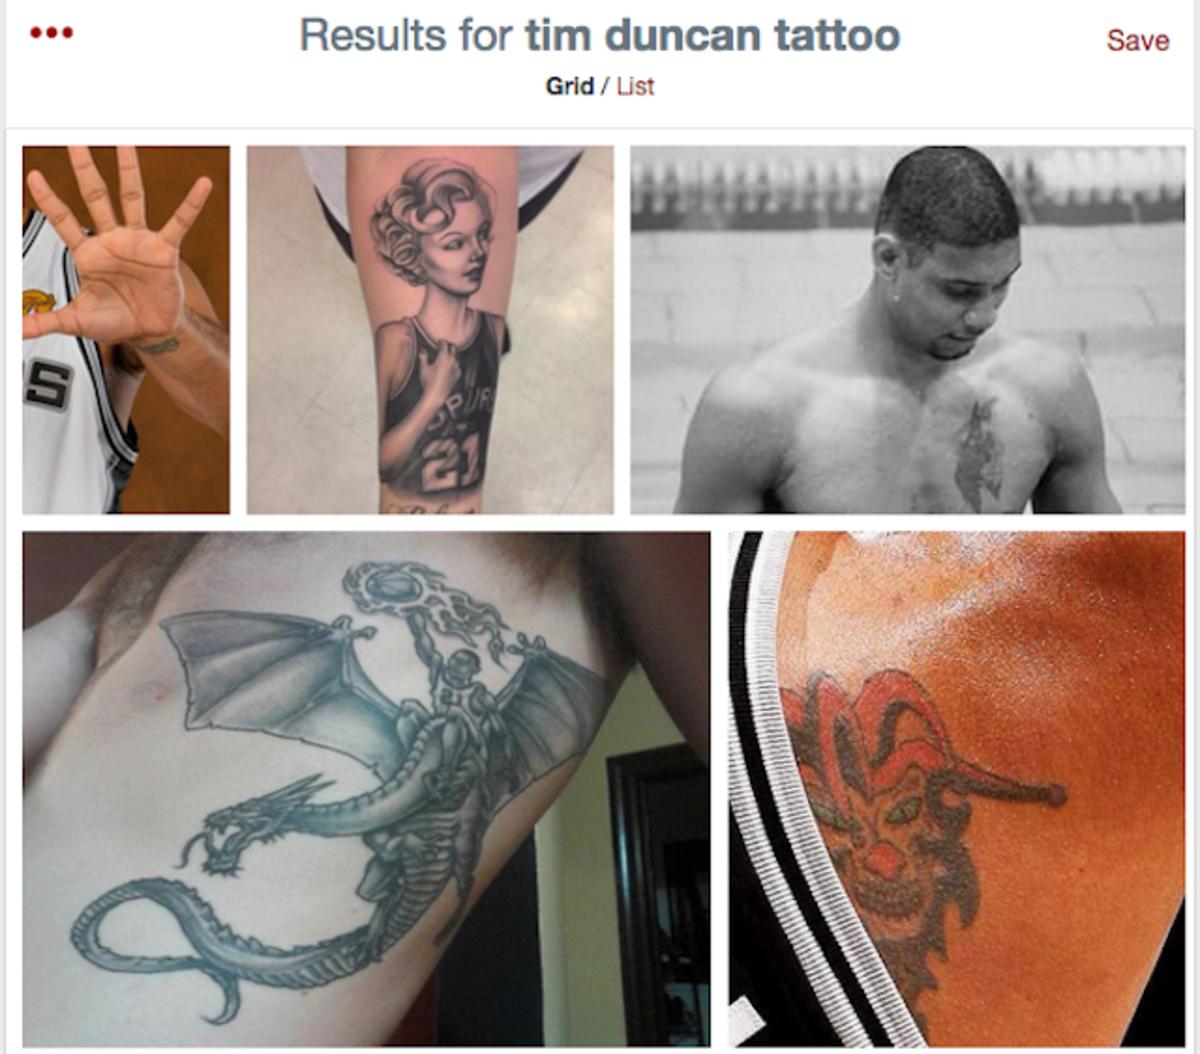 5 things NOT to do when getting a sports tattoo - Sports Illustrated